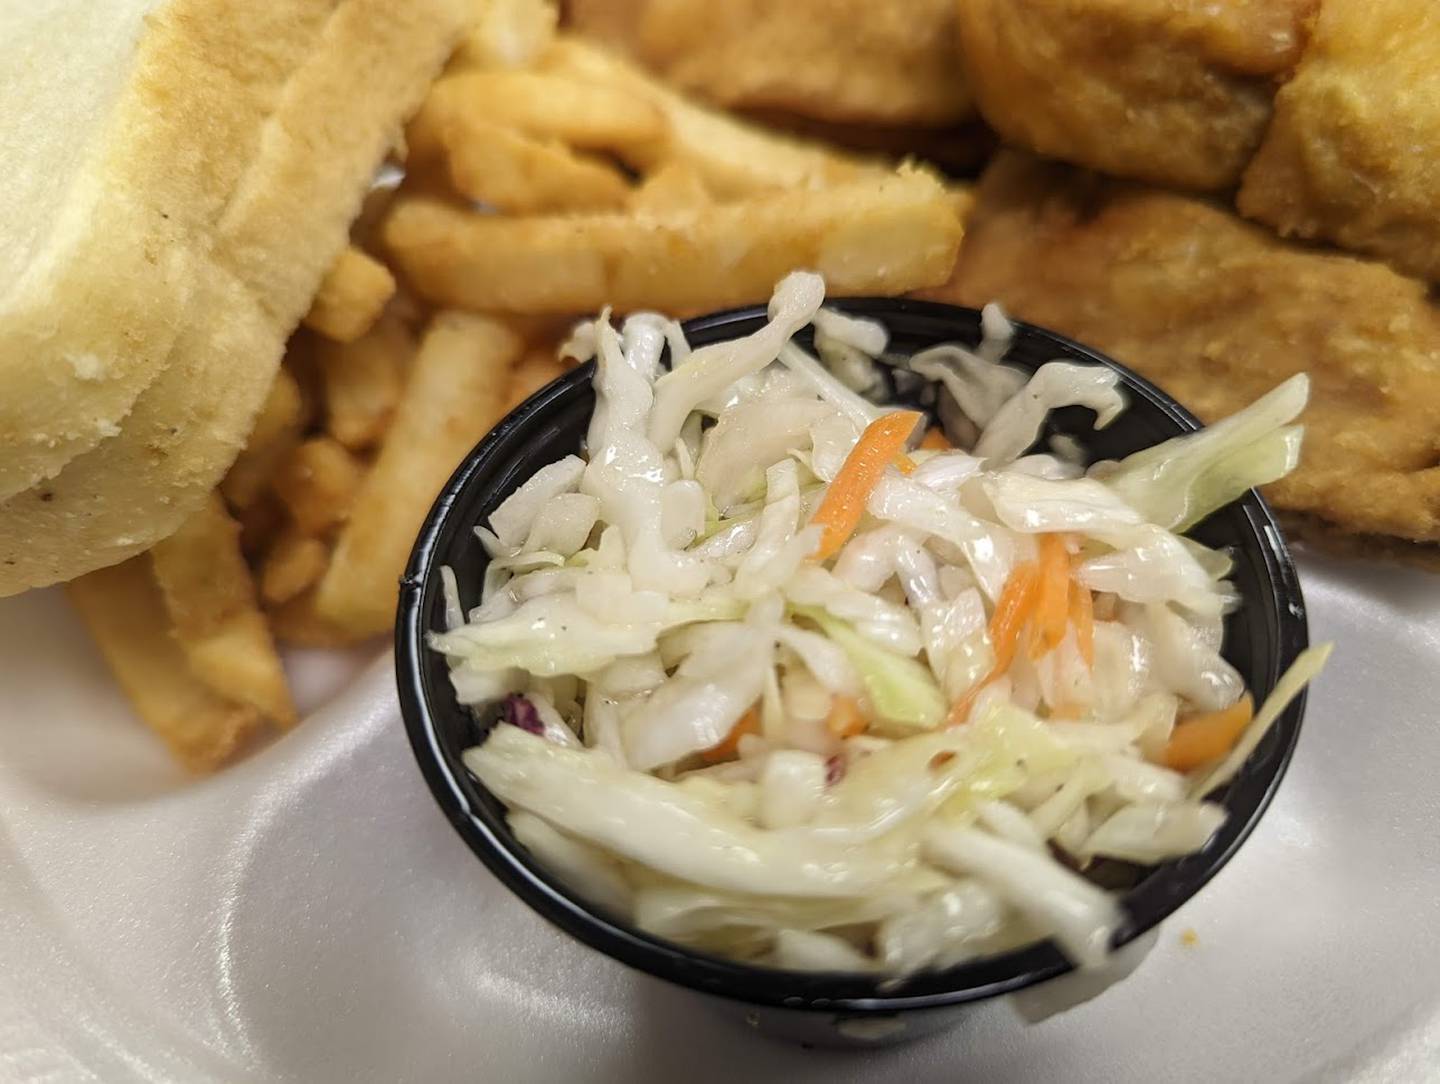 Pictured is the vinegar cole slaw  as served with a chicken dinner at the Knights of Columbus Holy Trinity Council No. 4400 on Joliet's East side. The dinner also came with battered fries and two slices of bread.